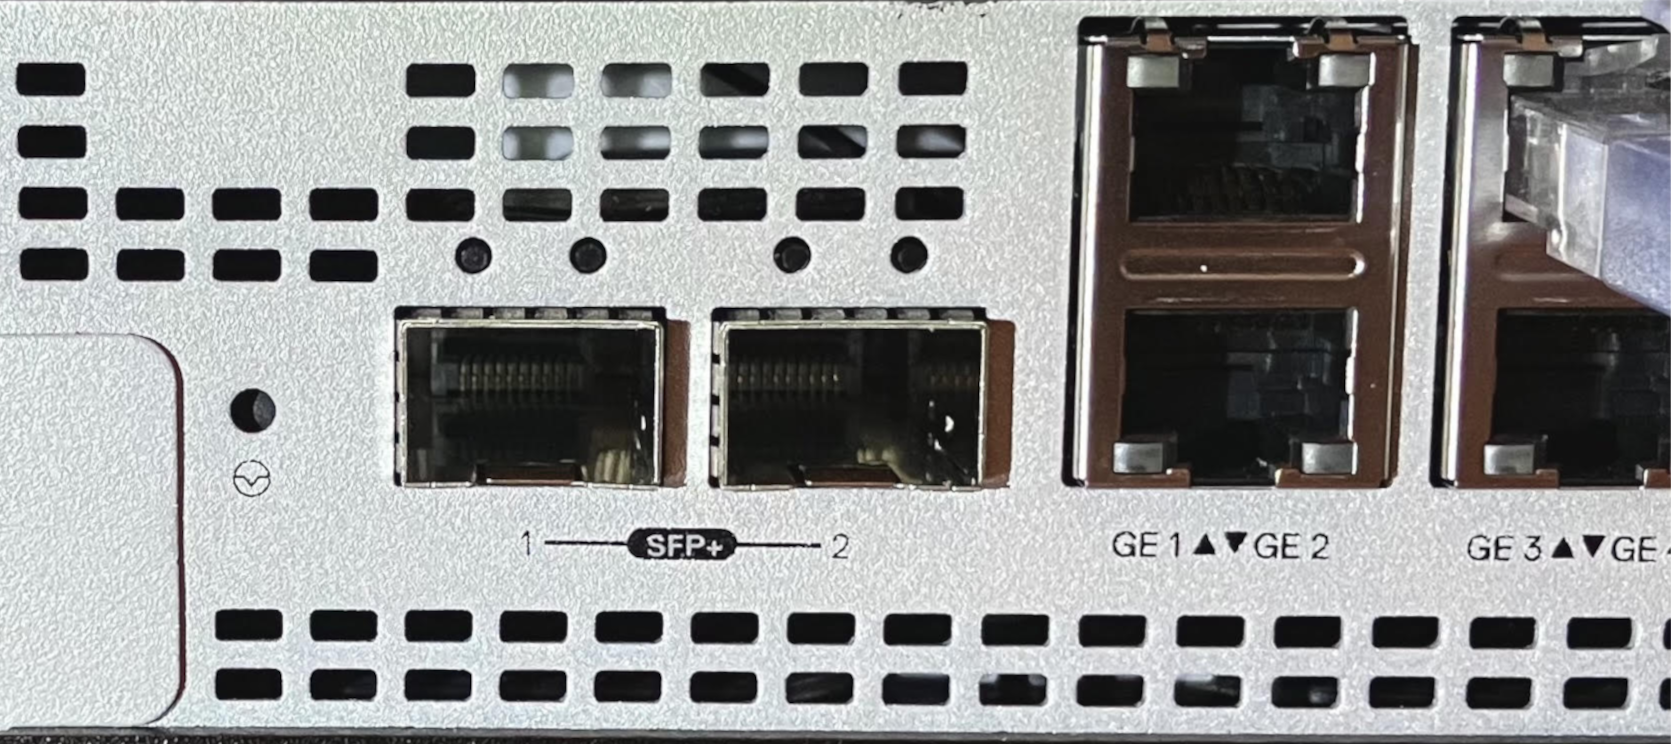 The left port, SFP+ 1, is port 7. The right port, SFP+ 2, is port 8.